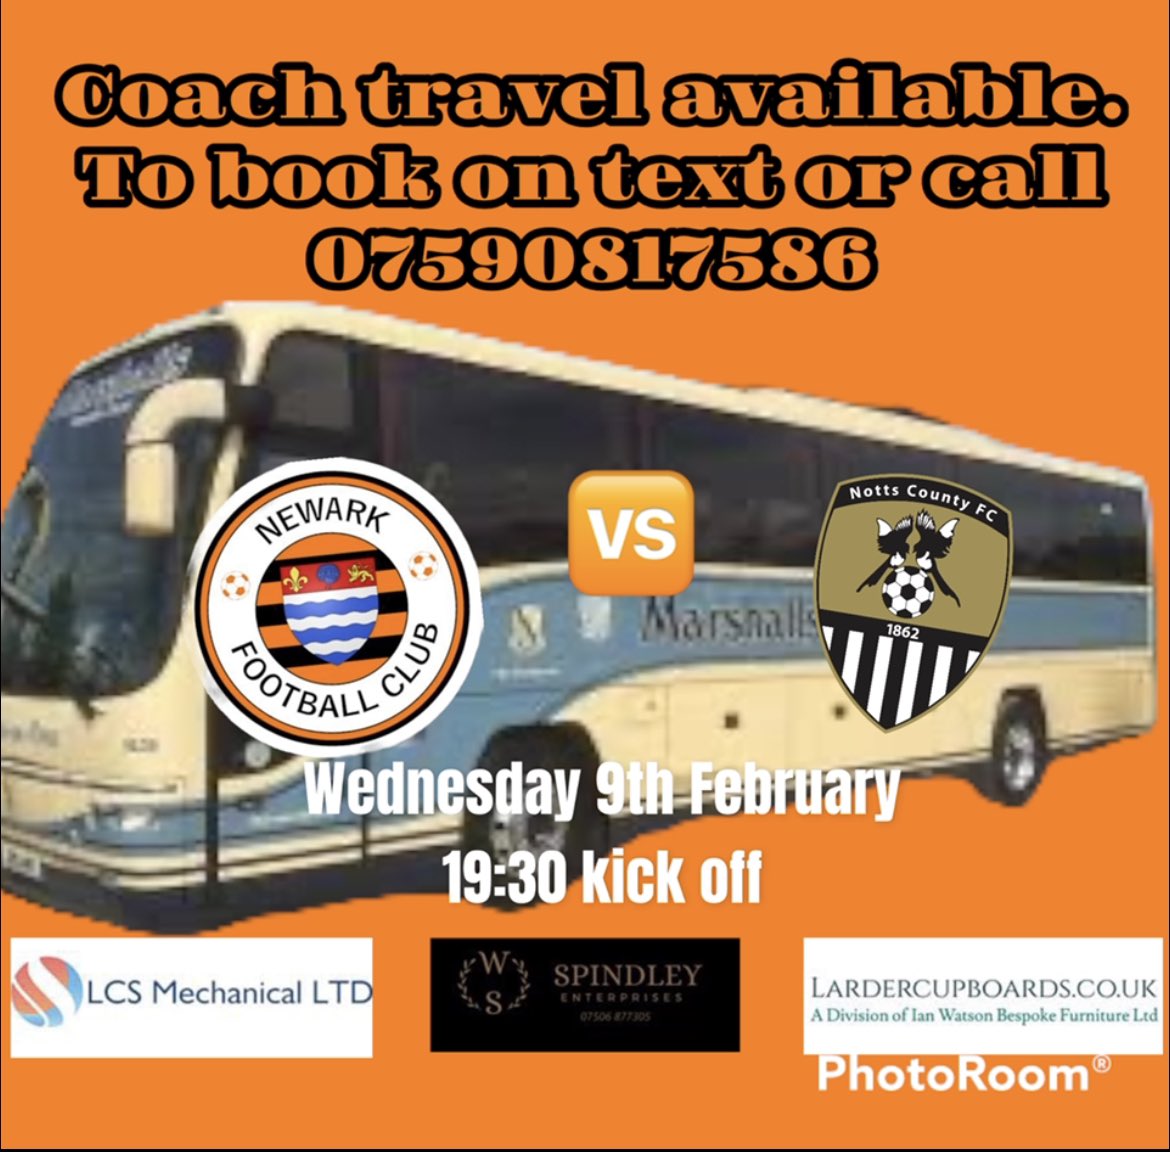 Wednesday 9th February we host @Official_NCFC in the Notts Senior cup. Coach travel from now available. #NewarkFC #NonLeague #TheHighwayMen